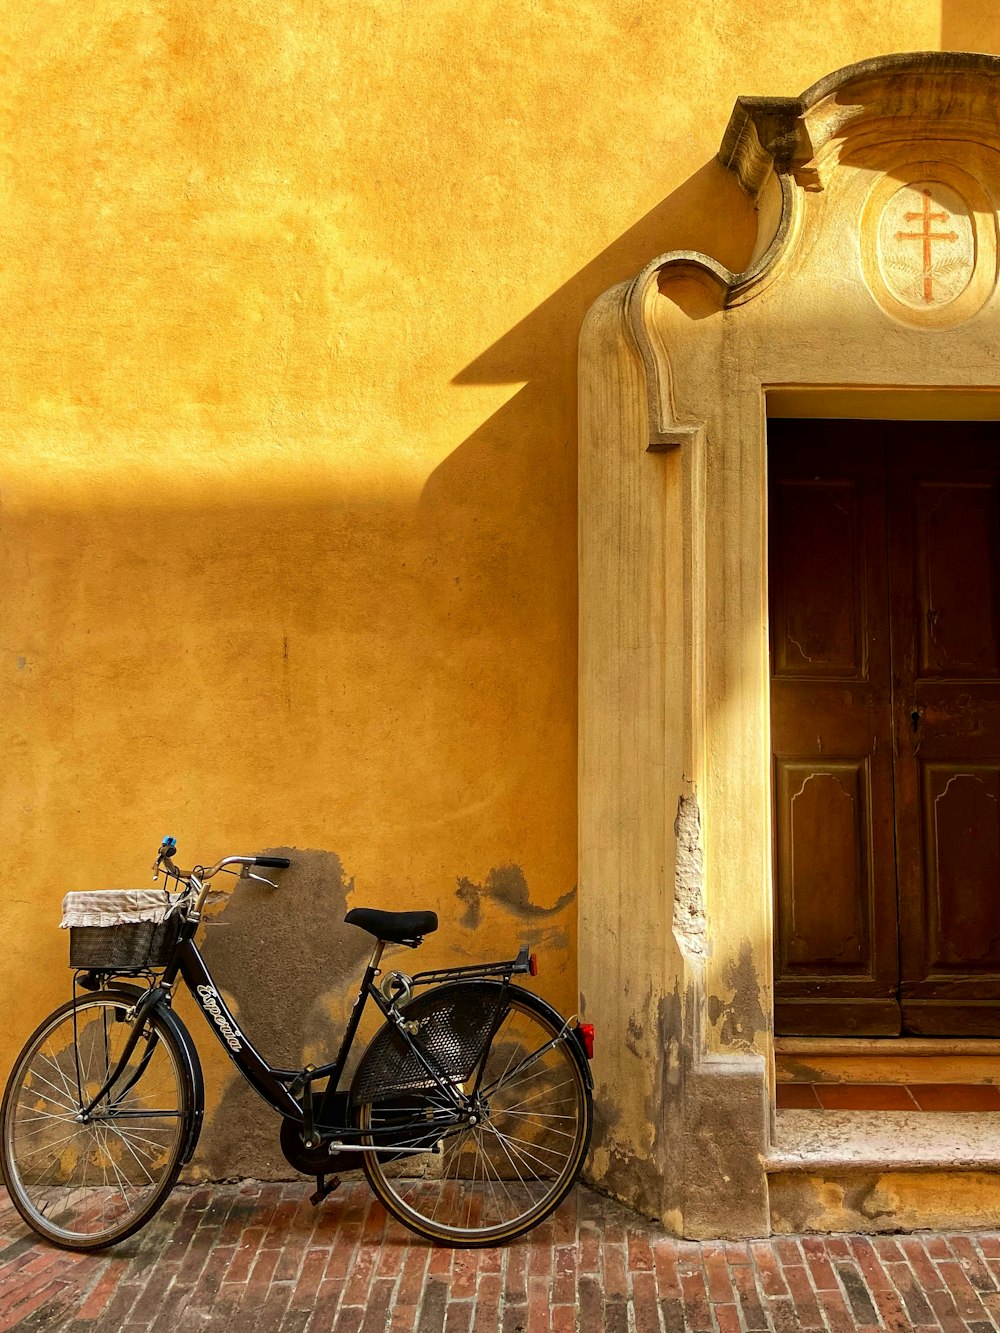 a bicycle parked in front of a yellow building